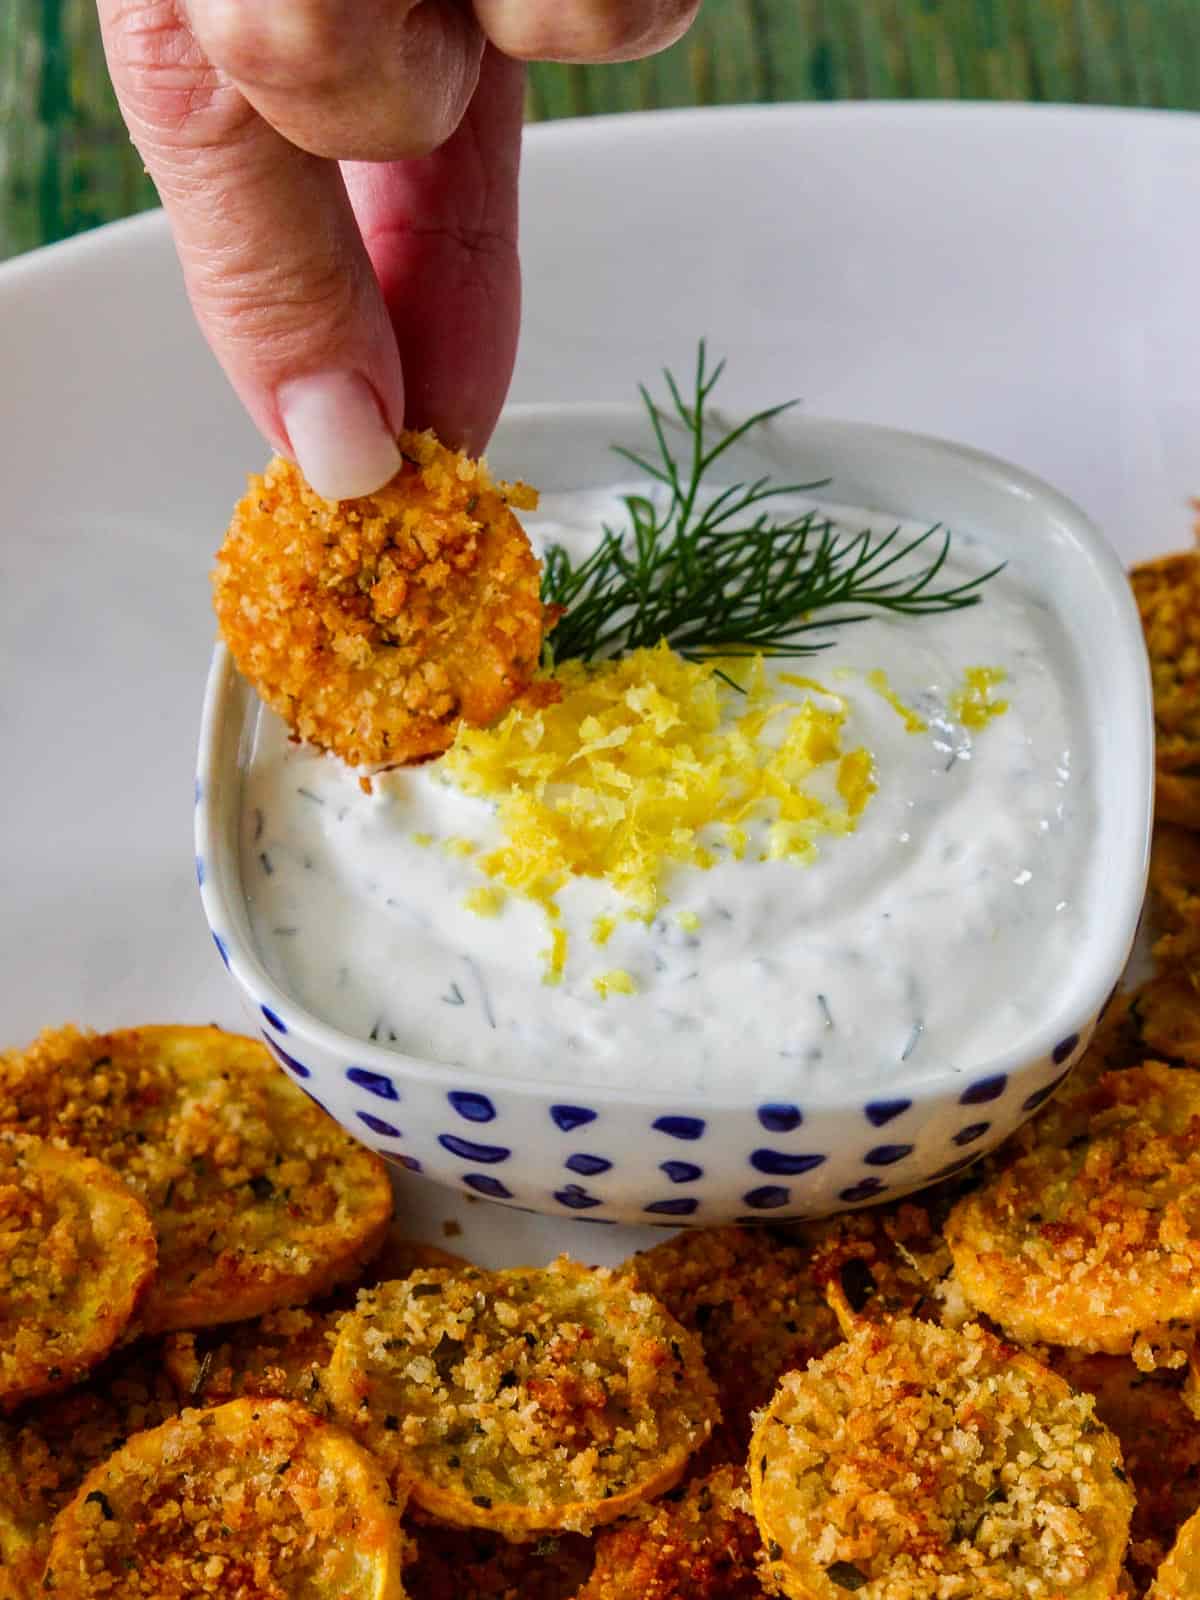 https://www.delicioustable.com/wp-content/uploads/2021/10/Dipping-a-Zucchini-Chip-into-lemon-dill-yogurt-dip.jpg